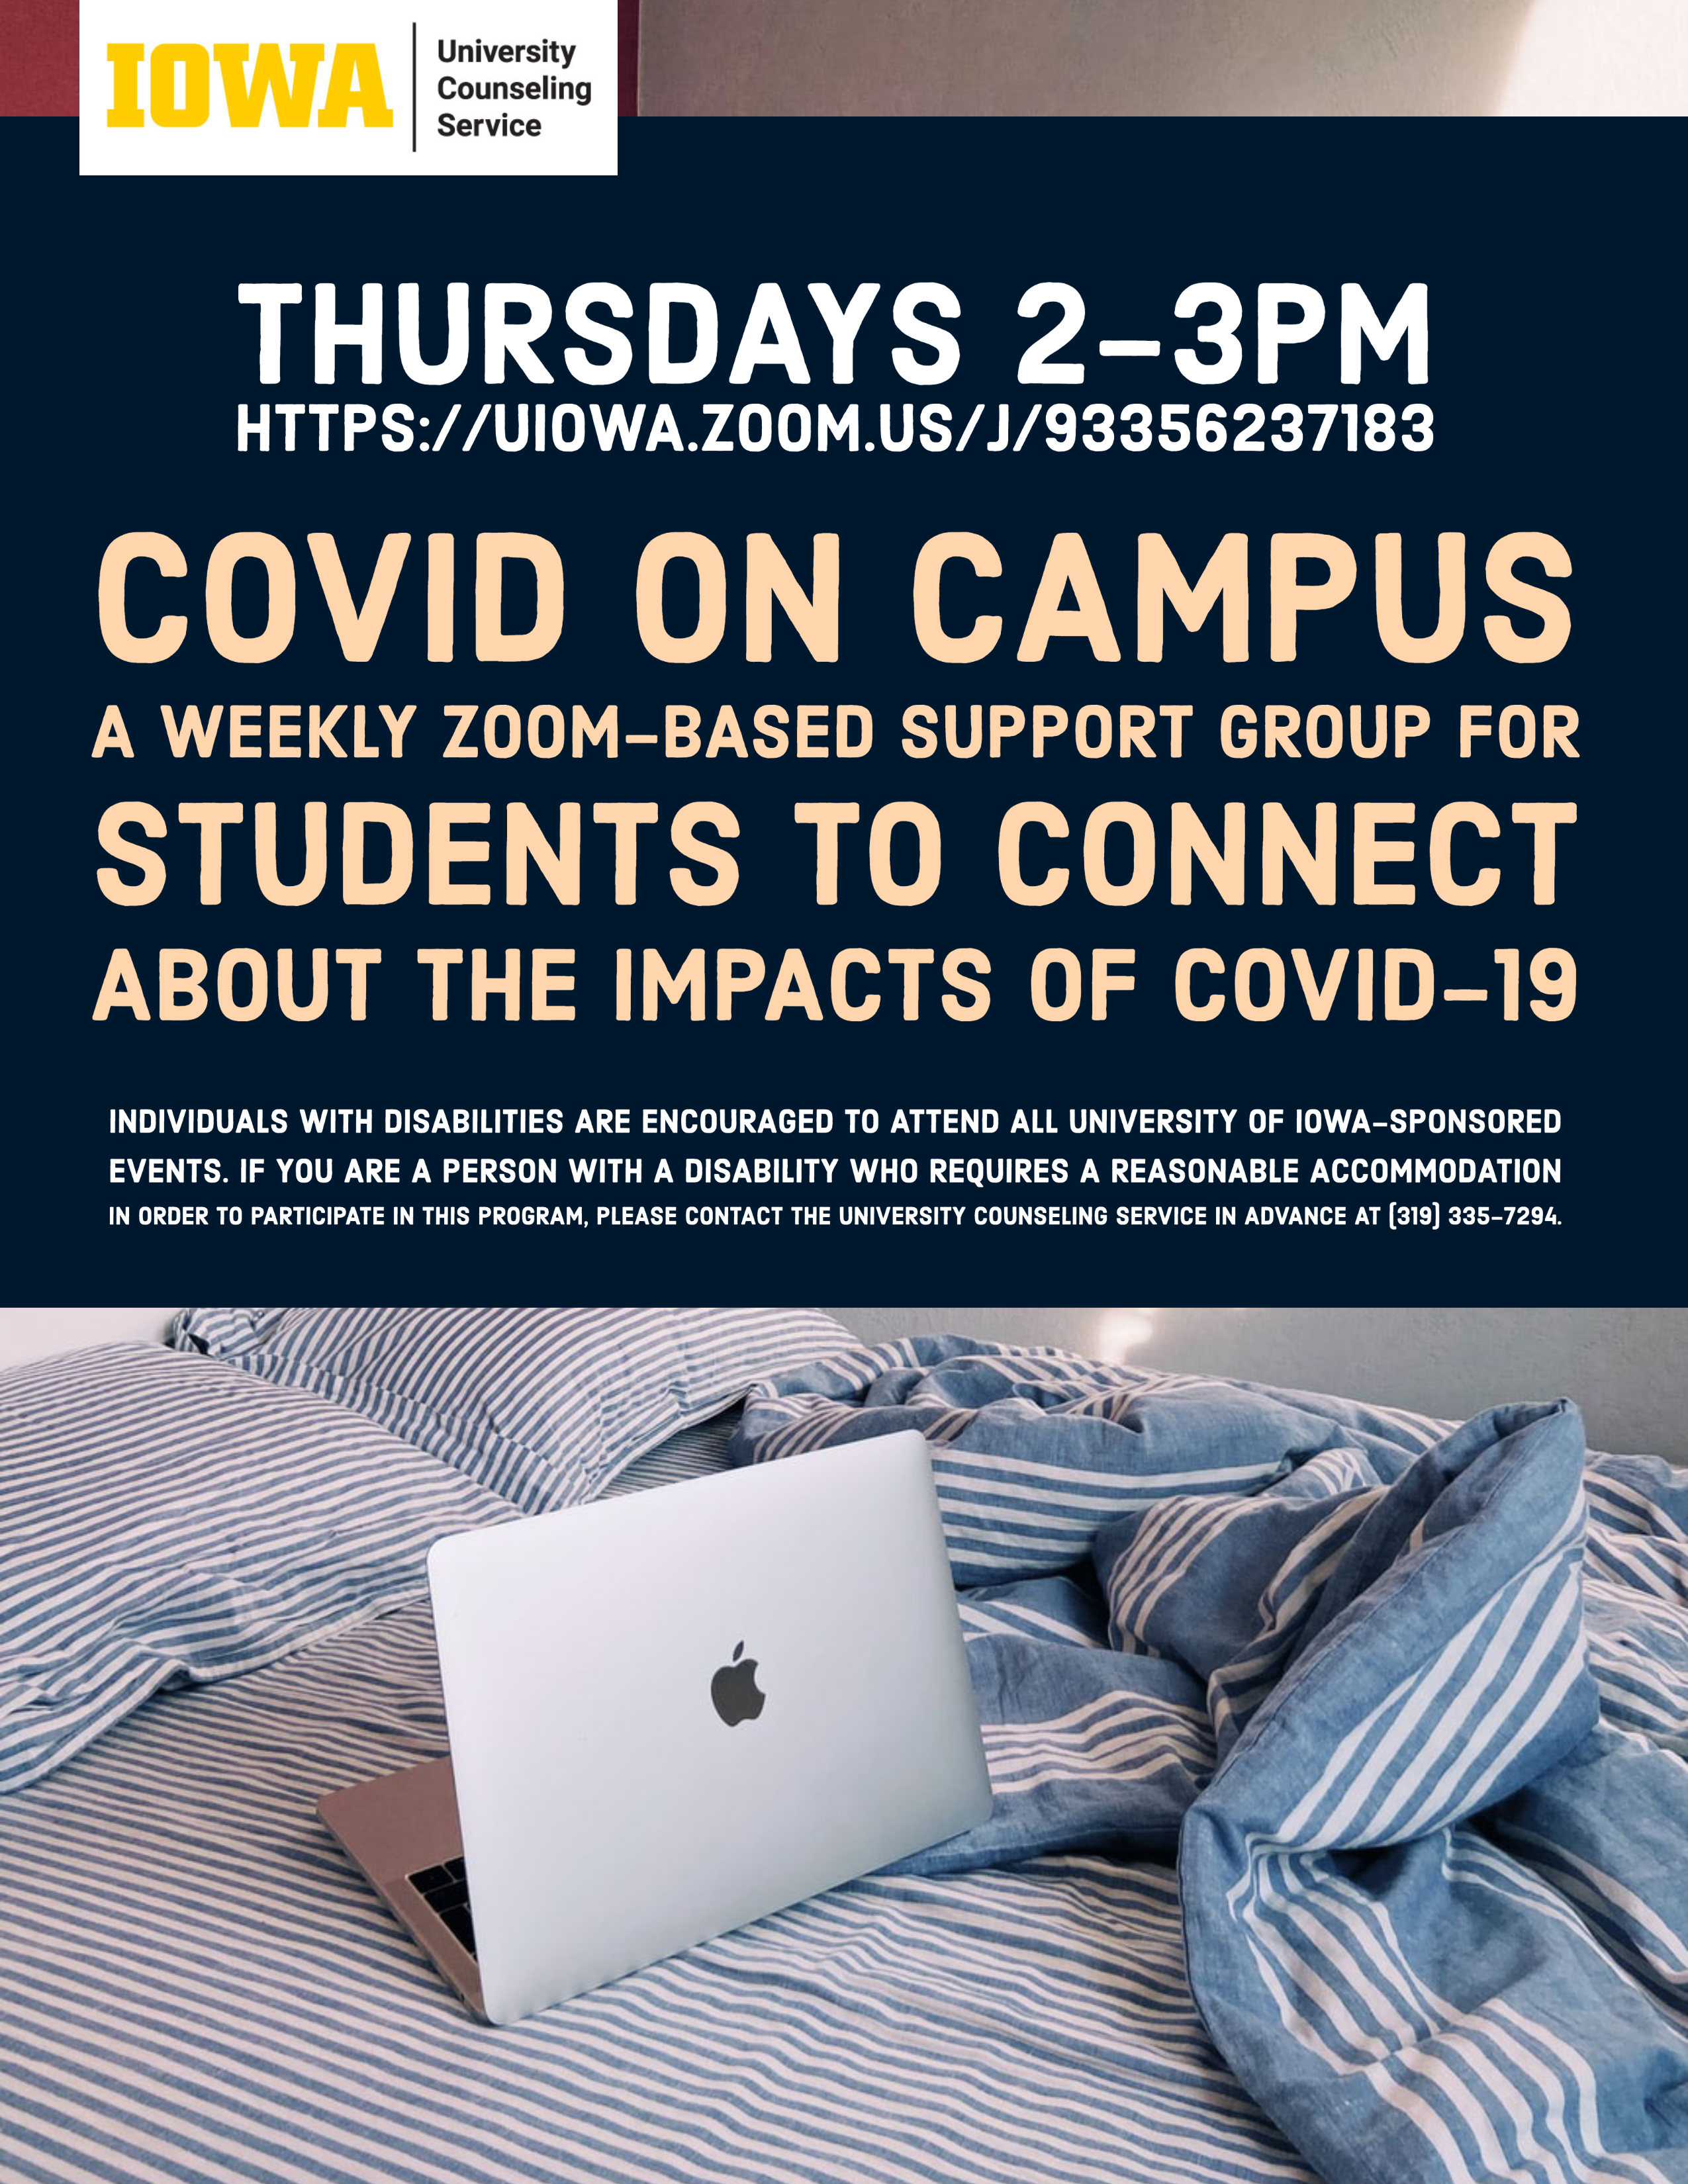 Flyer for "Covid on Campus" support group, a weekly zoom-based support group for students to connect about the impacts of COVID-19. The program will take place weekly on Thursdays from 2-3pm CST.